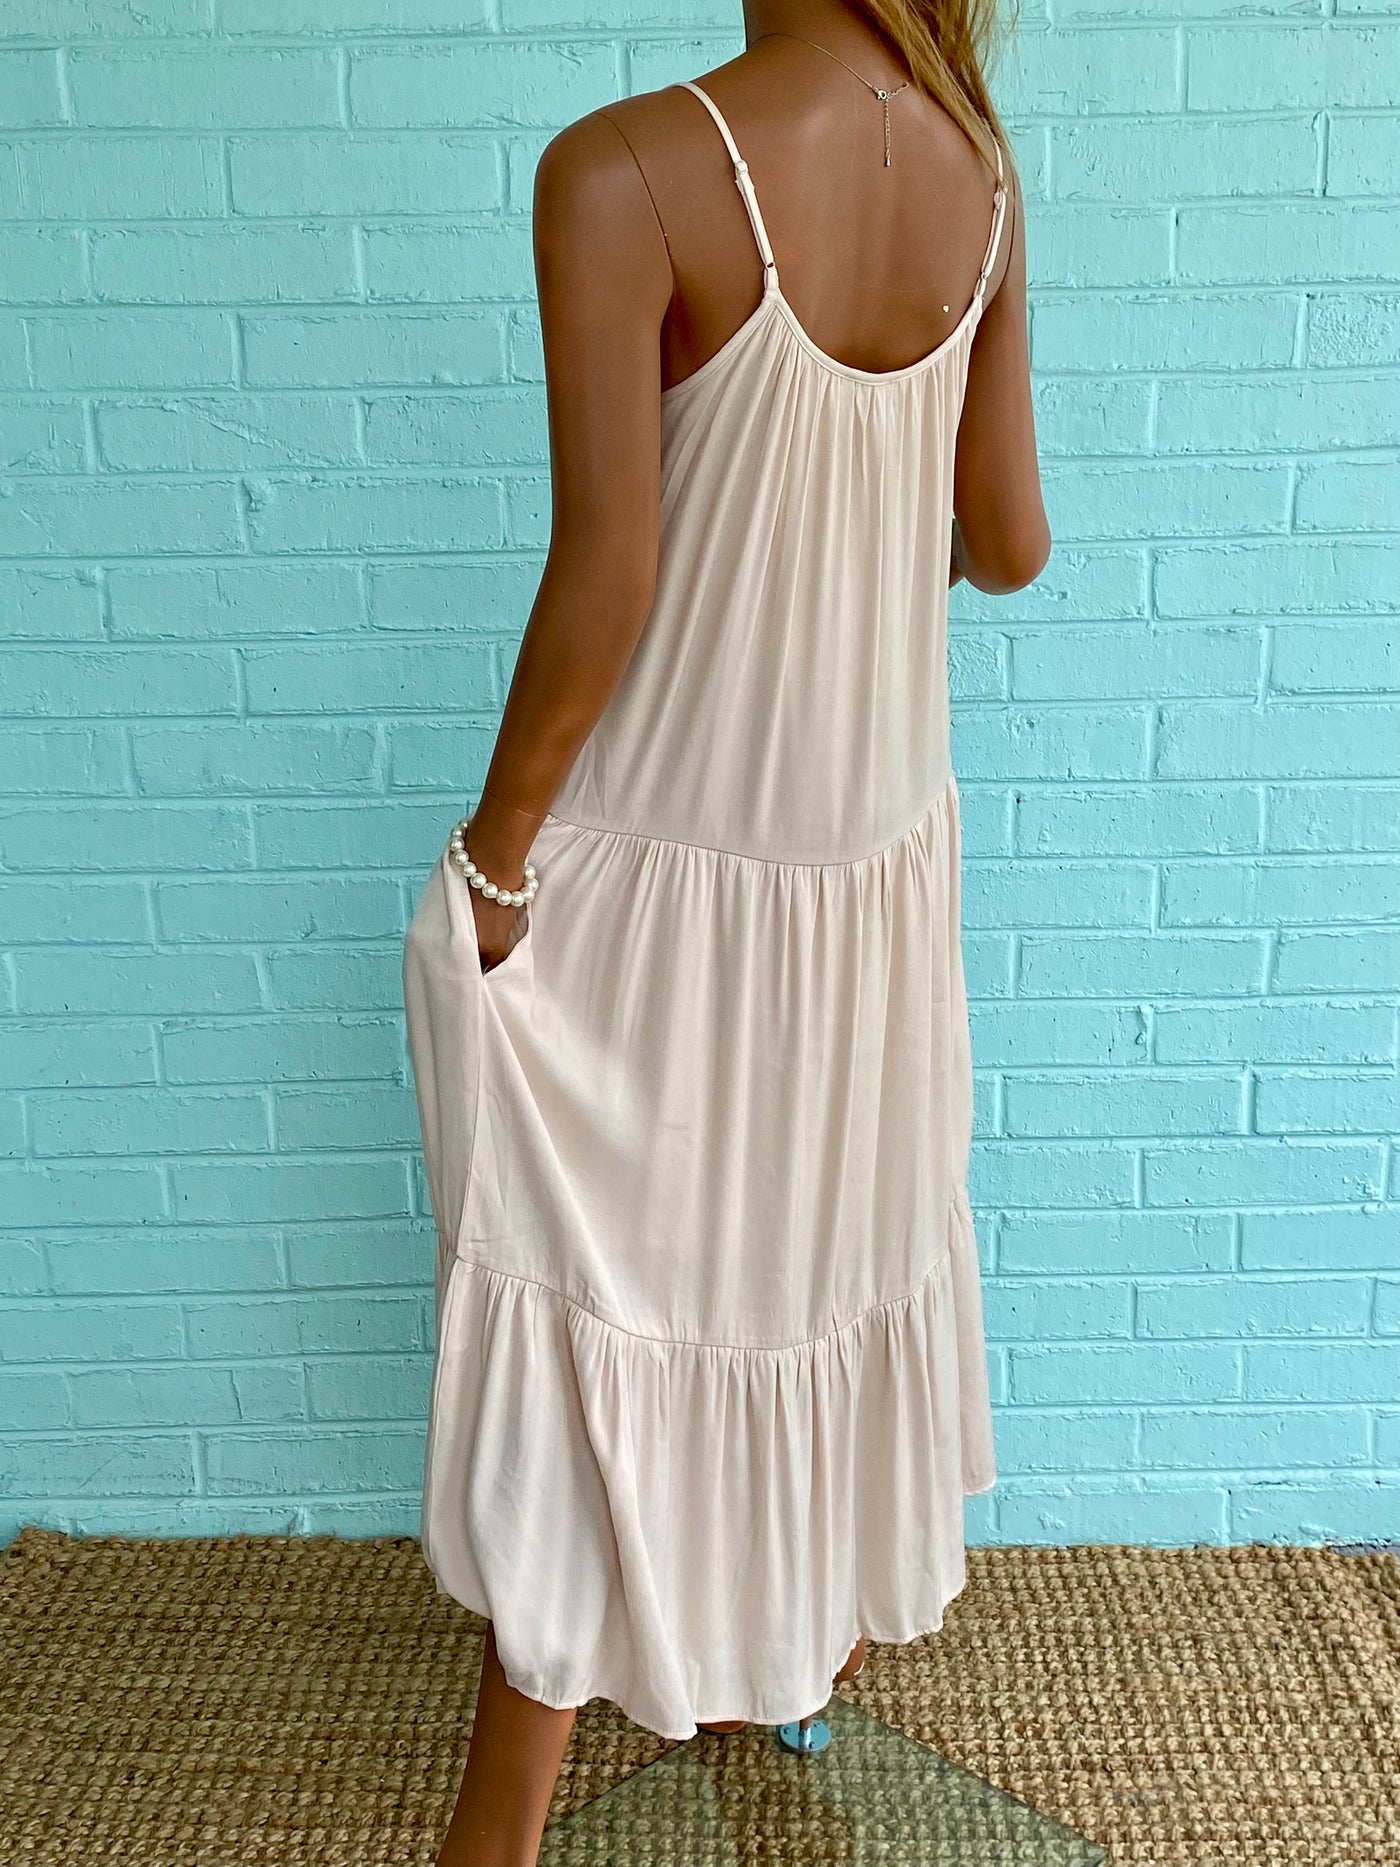 Just One More Day Maxi Dress